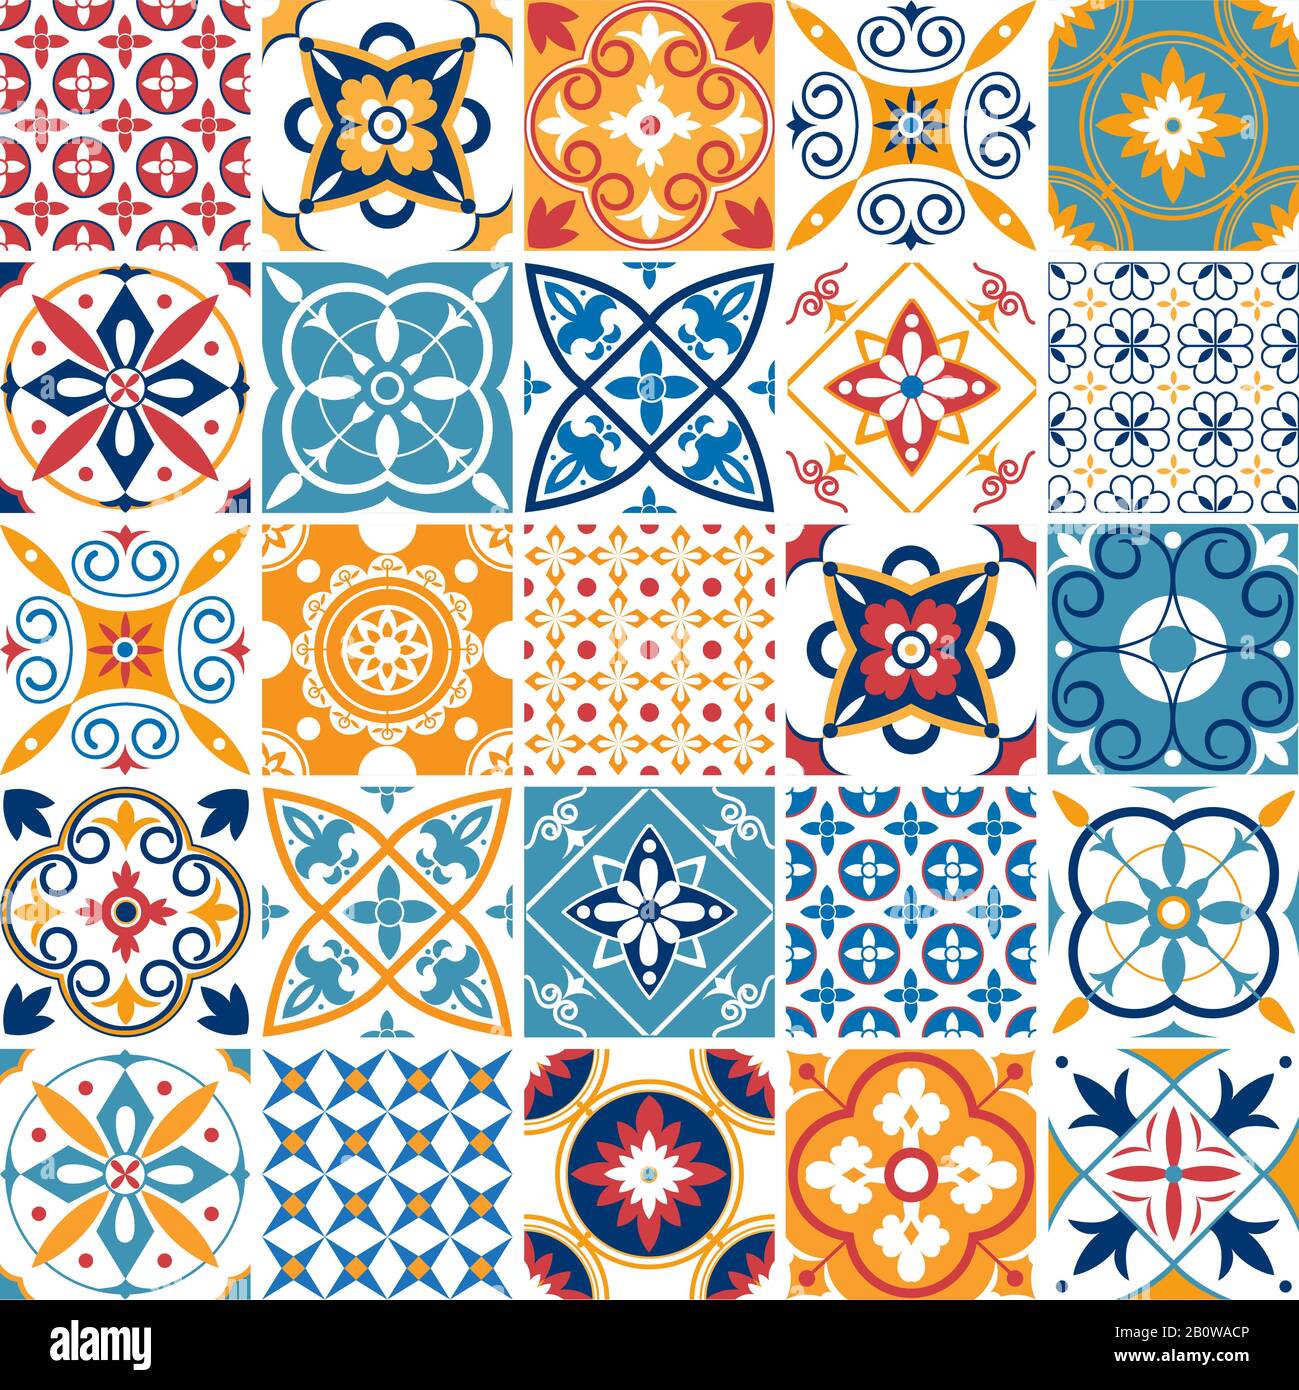 Portugal seamless pattern. Vintage mediterranean ceramic tile texture. Geometric tiles patterns and wall print textures vector set Stock Vector